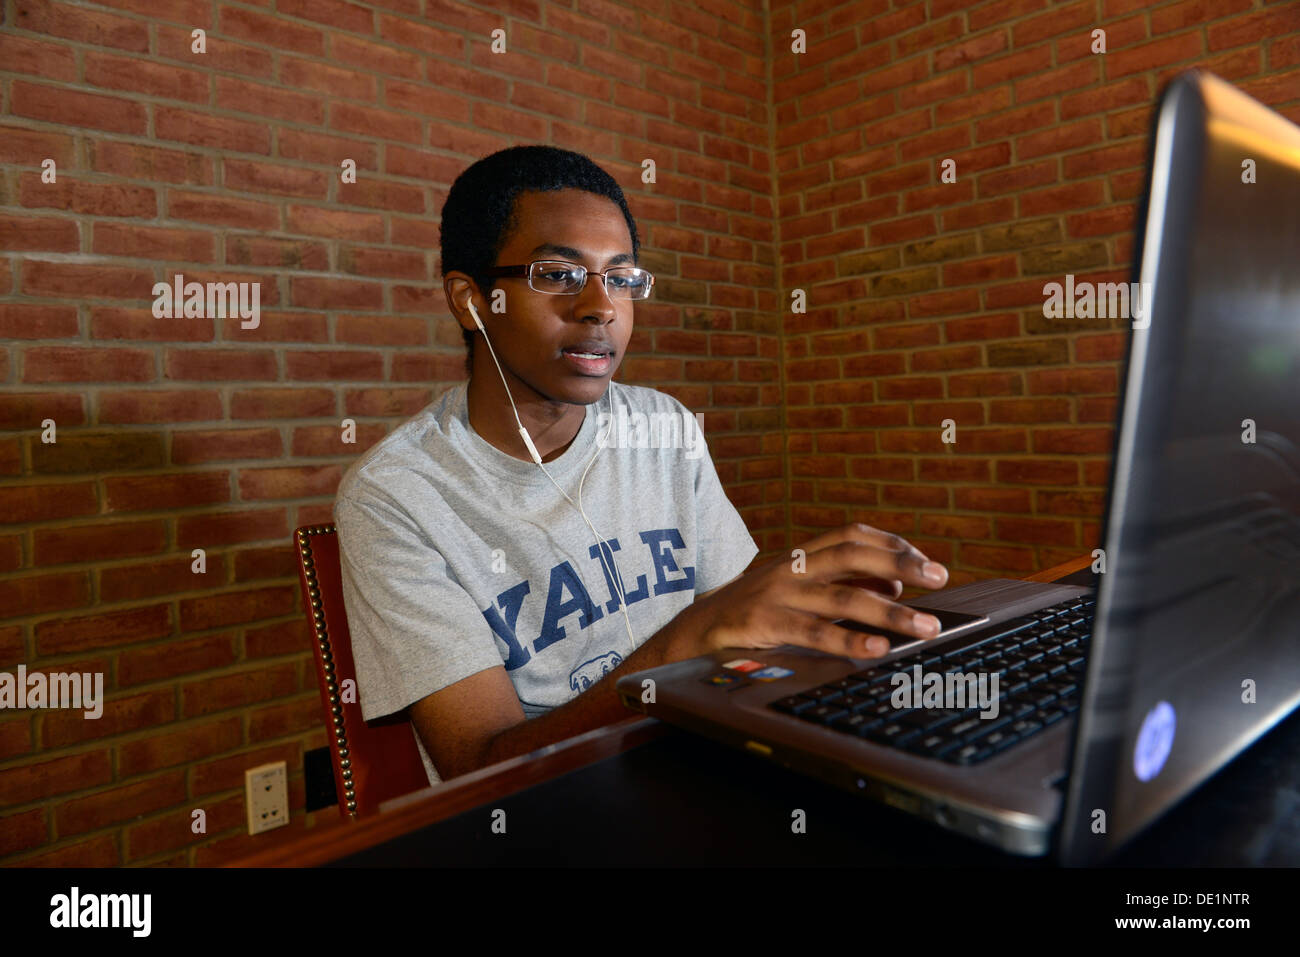 Yale student logs into the Yale network on her computer at Library.He's a pre-medical student. Stock Photo